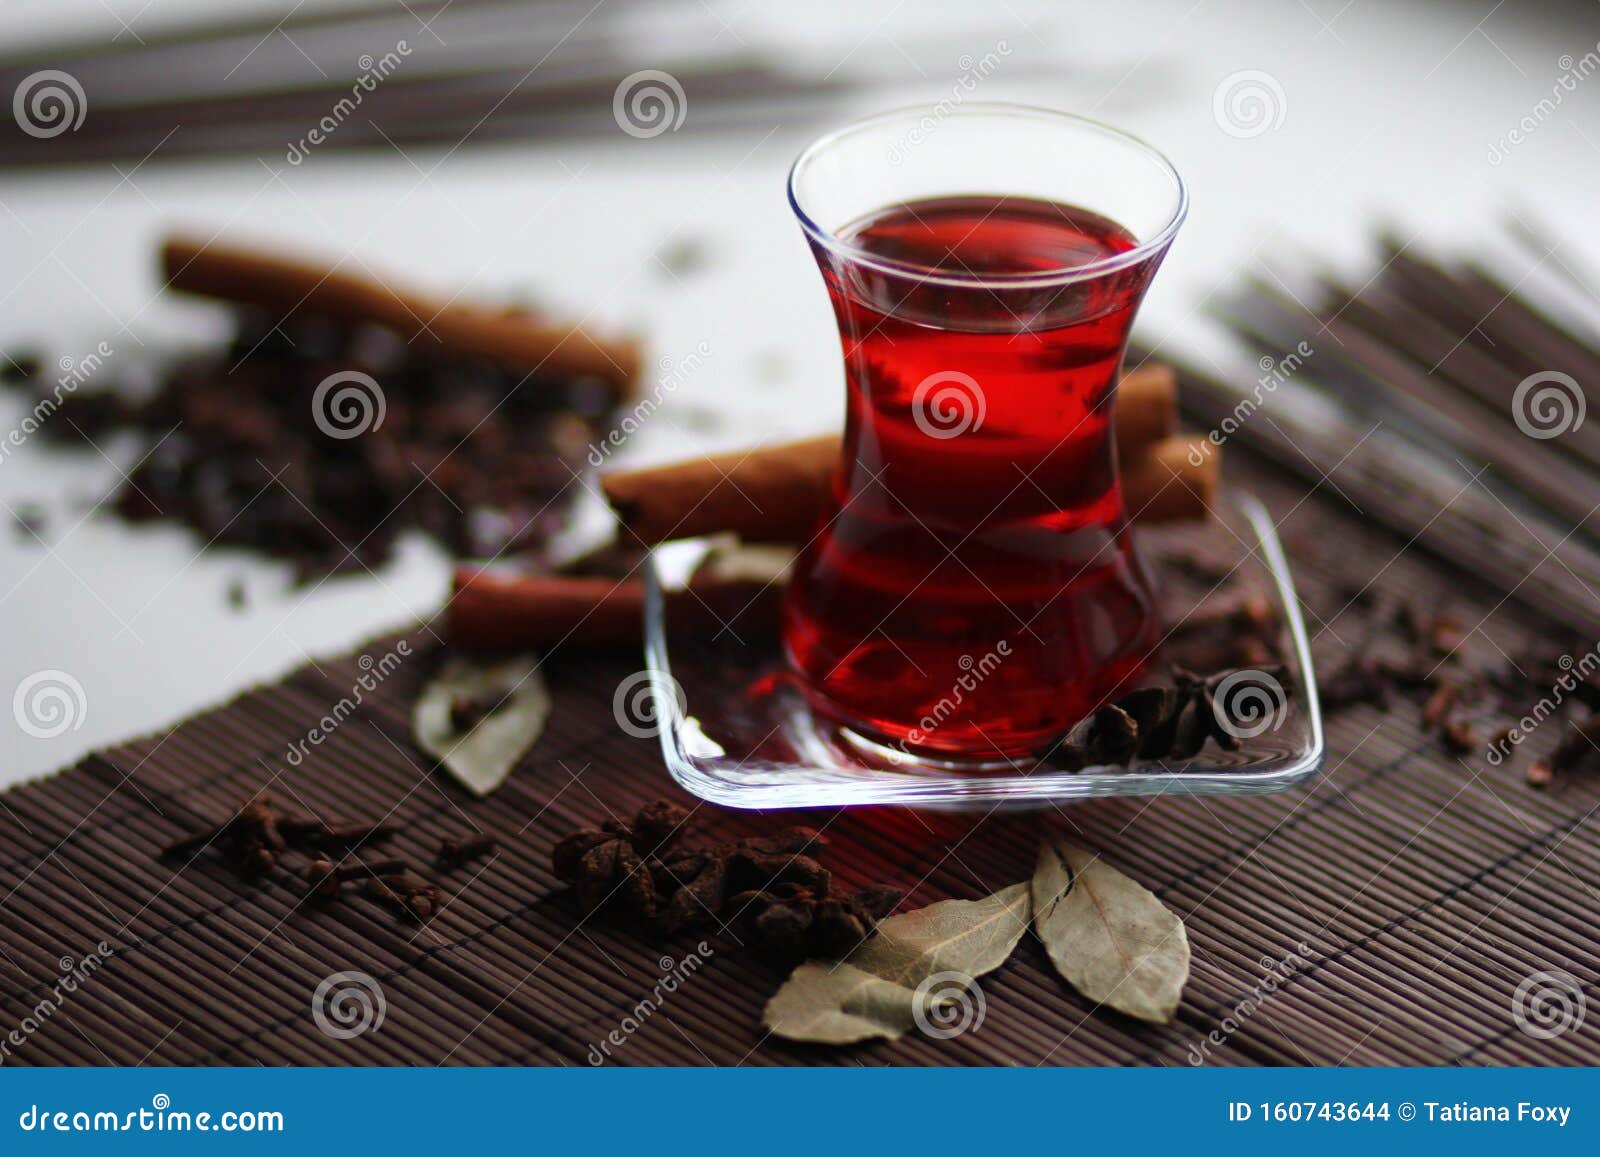 ruby carcade tea with cinnamon stick, cloves, badyan and bay leaves